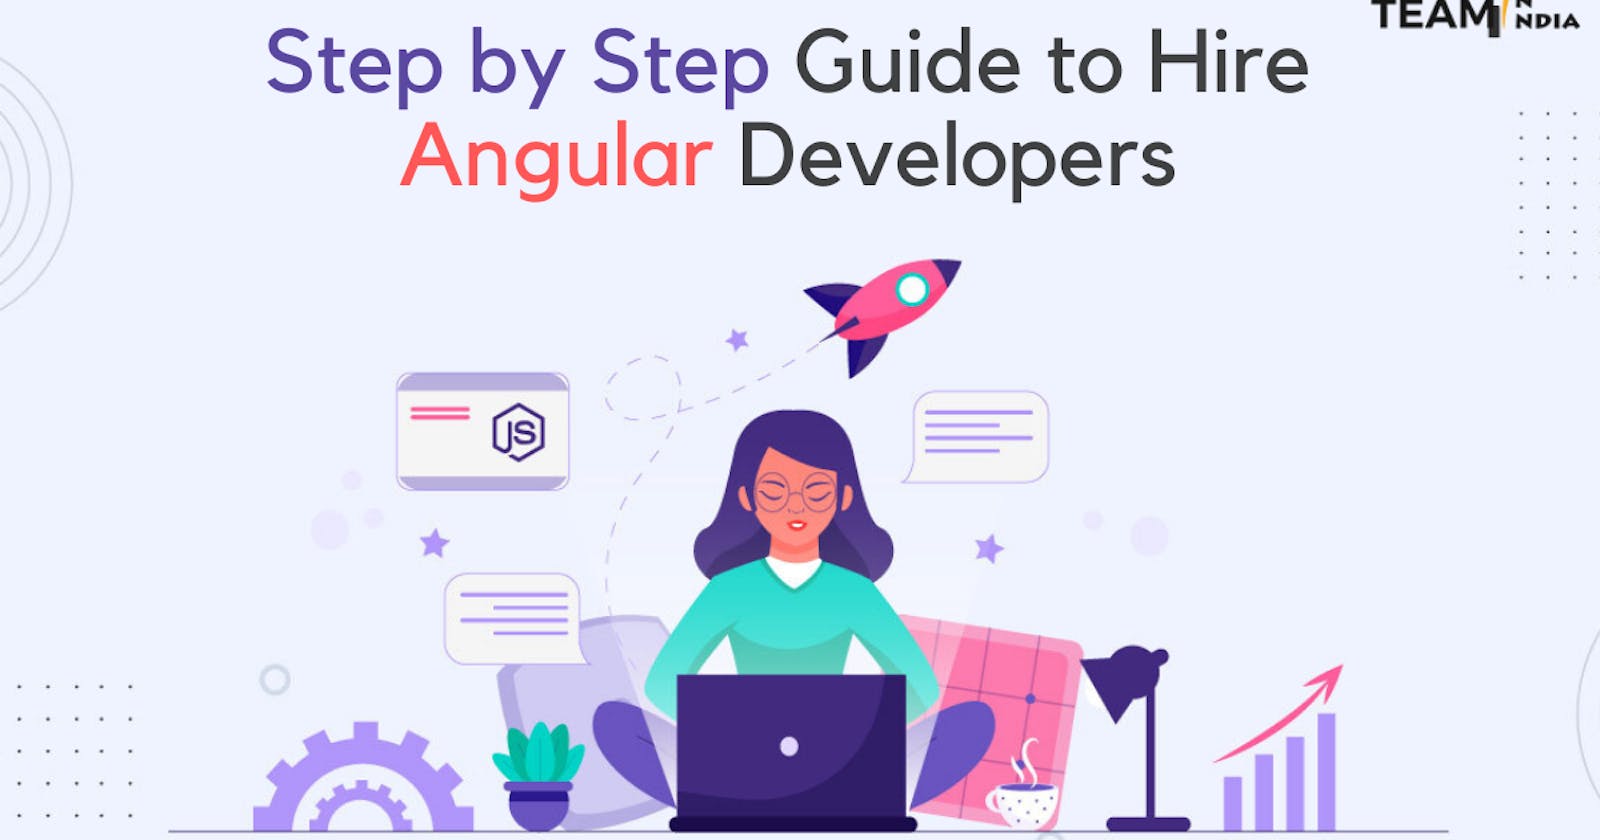 Step-by-Step Guide to Hire Angular Developers